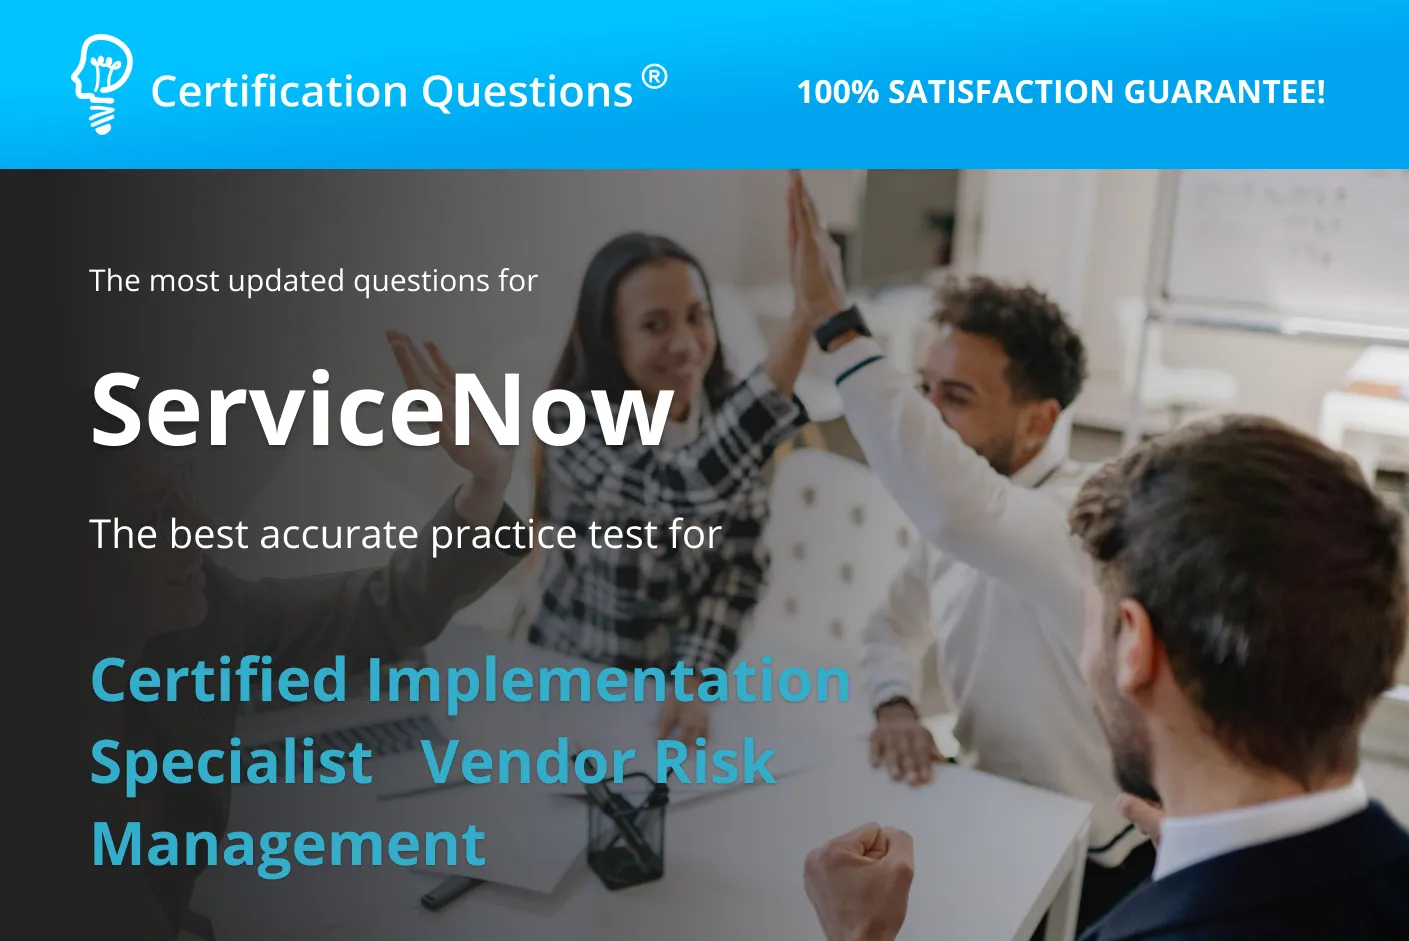 This image is related to ServiceNow exam questions